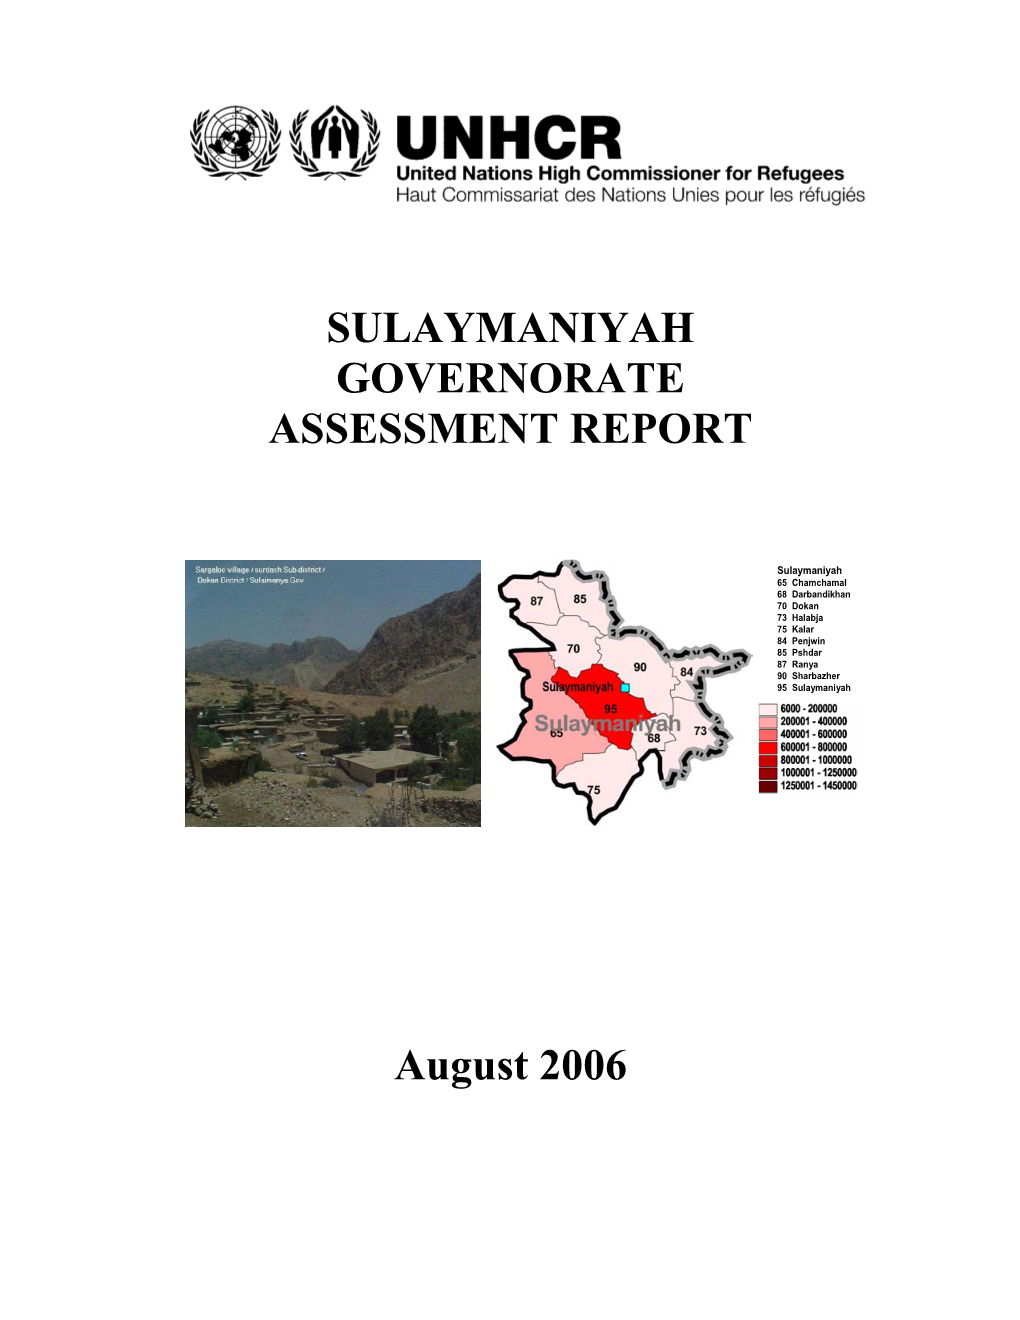 SULAYMANIYAH GOVERNORATE ASSESSMENT REPORT August 2006